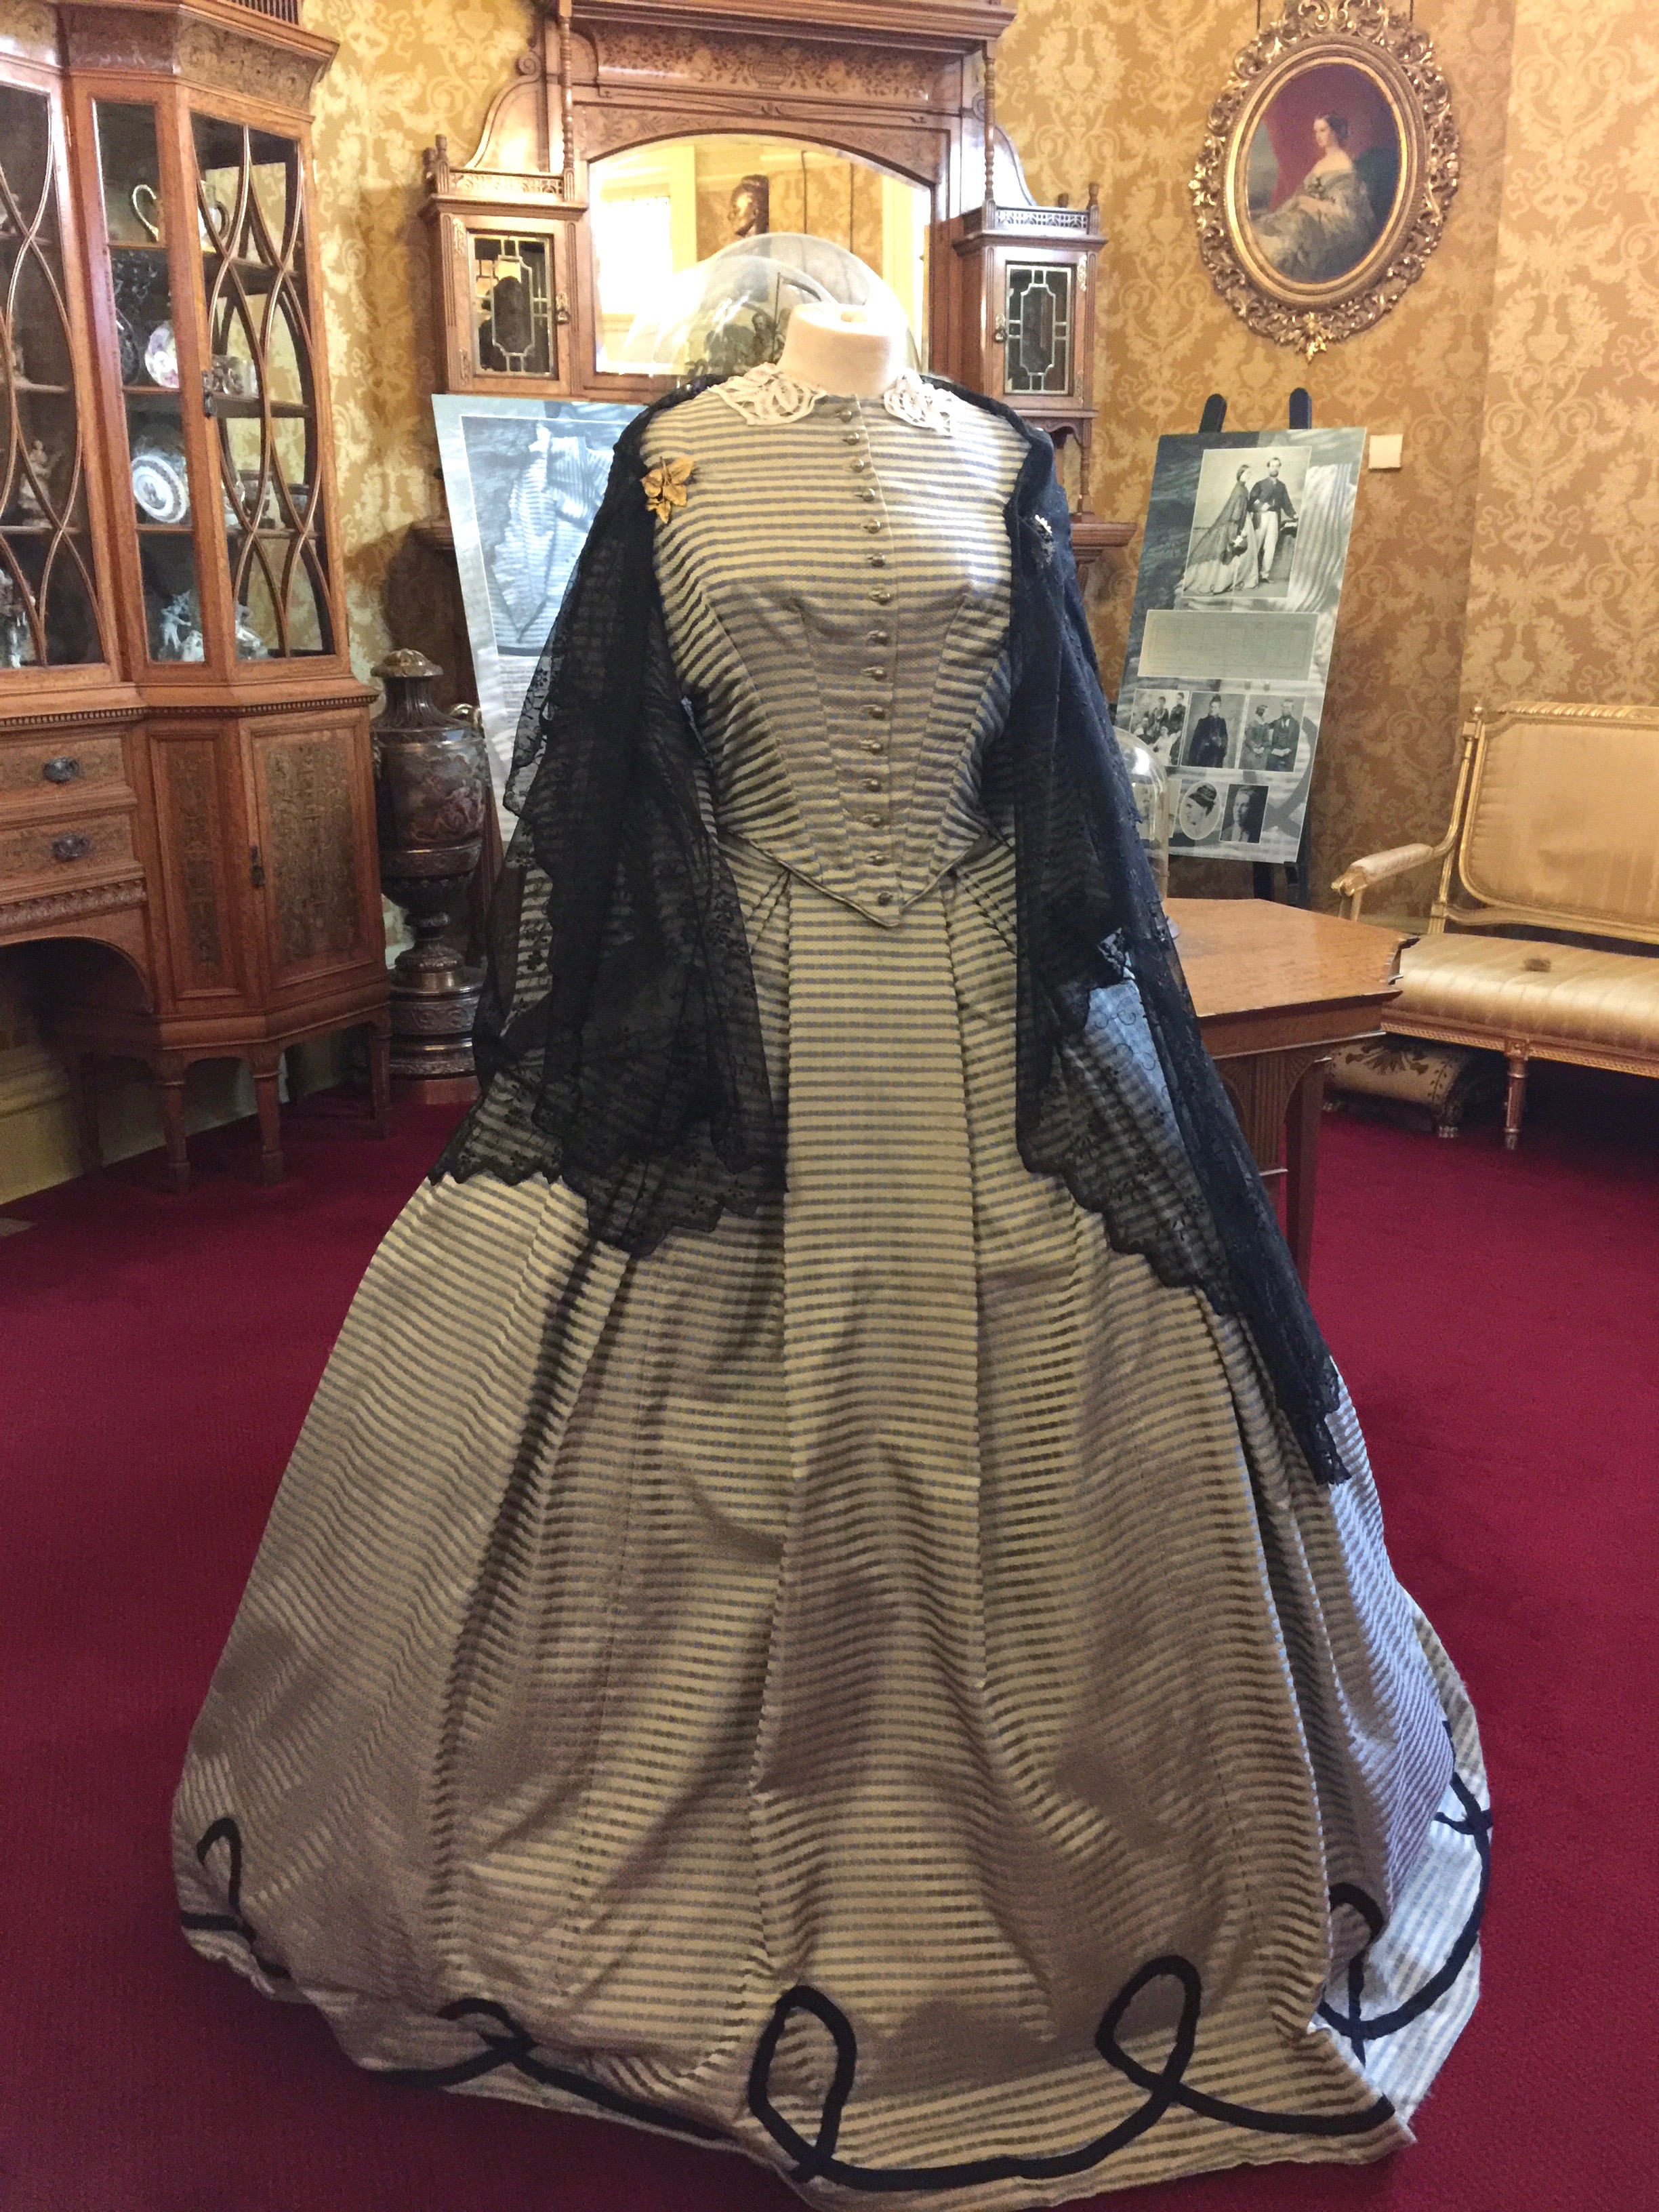 Costumes at the Russell Cotes Museum.